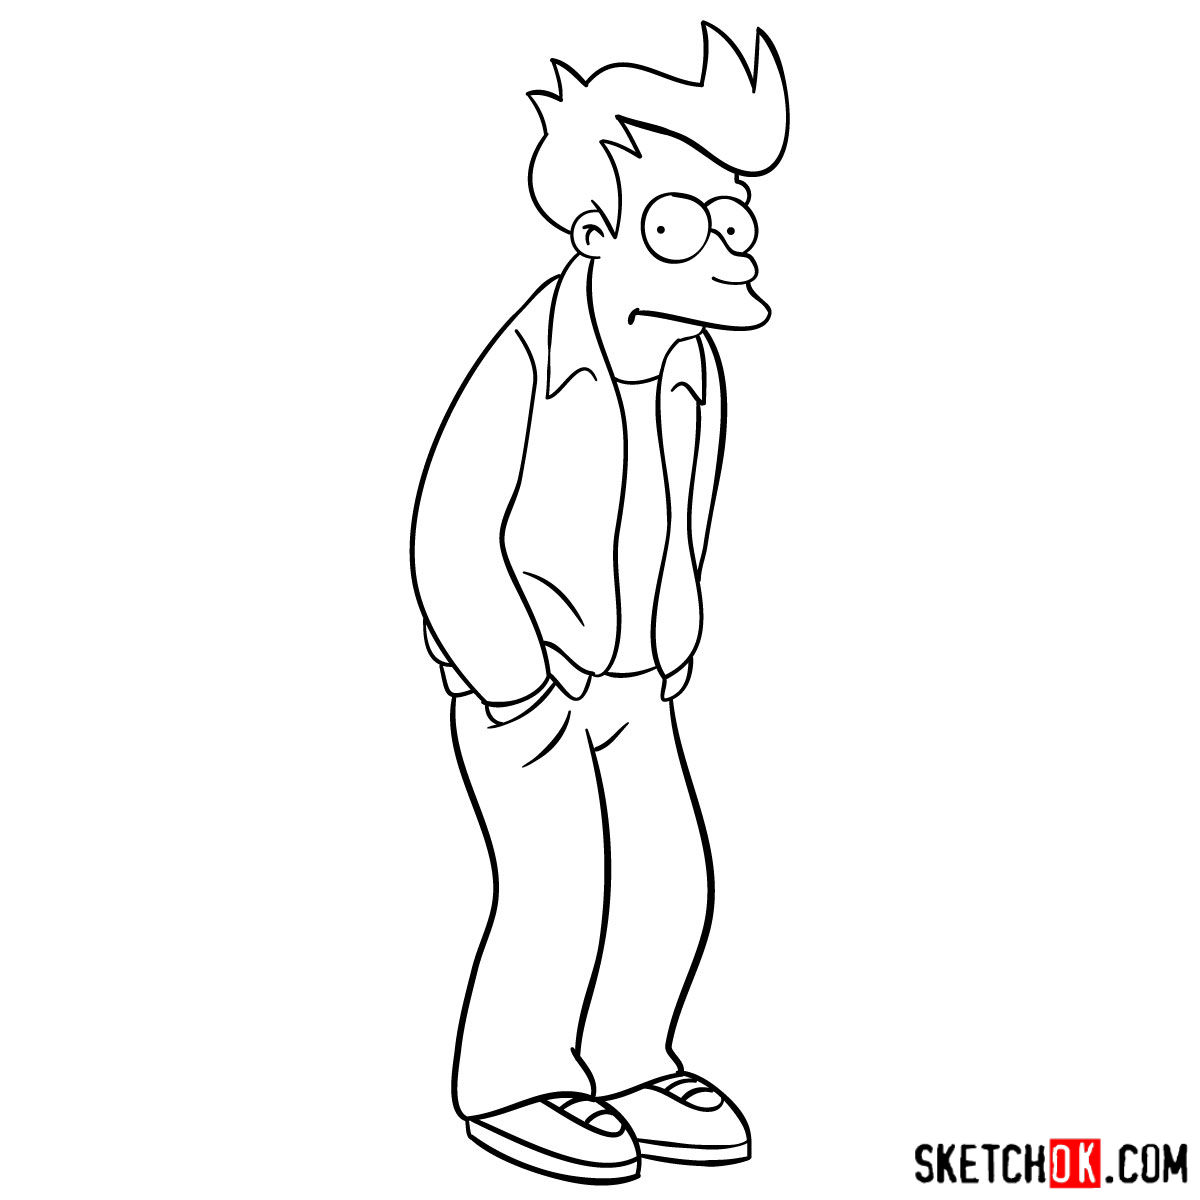 How to draw Philip J. Fry step by step - step 10